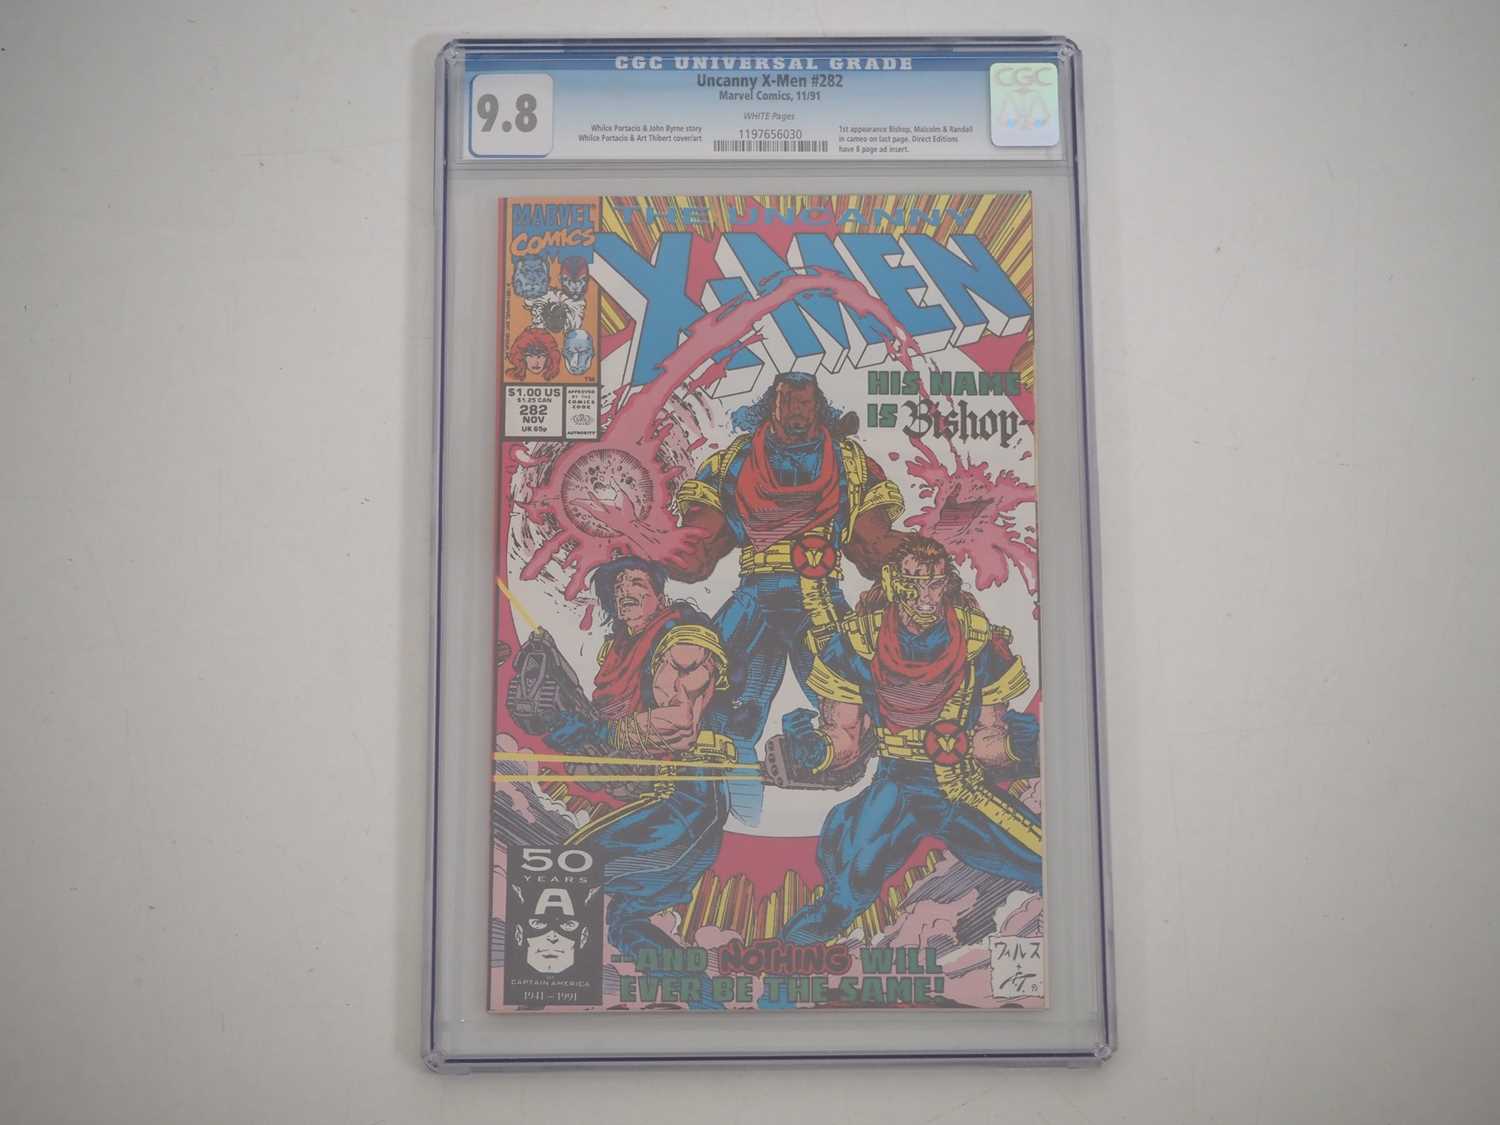 UNCANNY X-MEN #282 (1991 - MARVEL) - GRADED 9.8(NM/MINT) by CGC - The first appearance of Bishop -